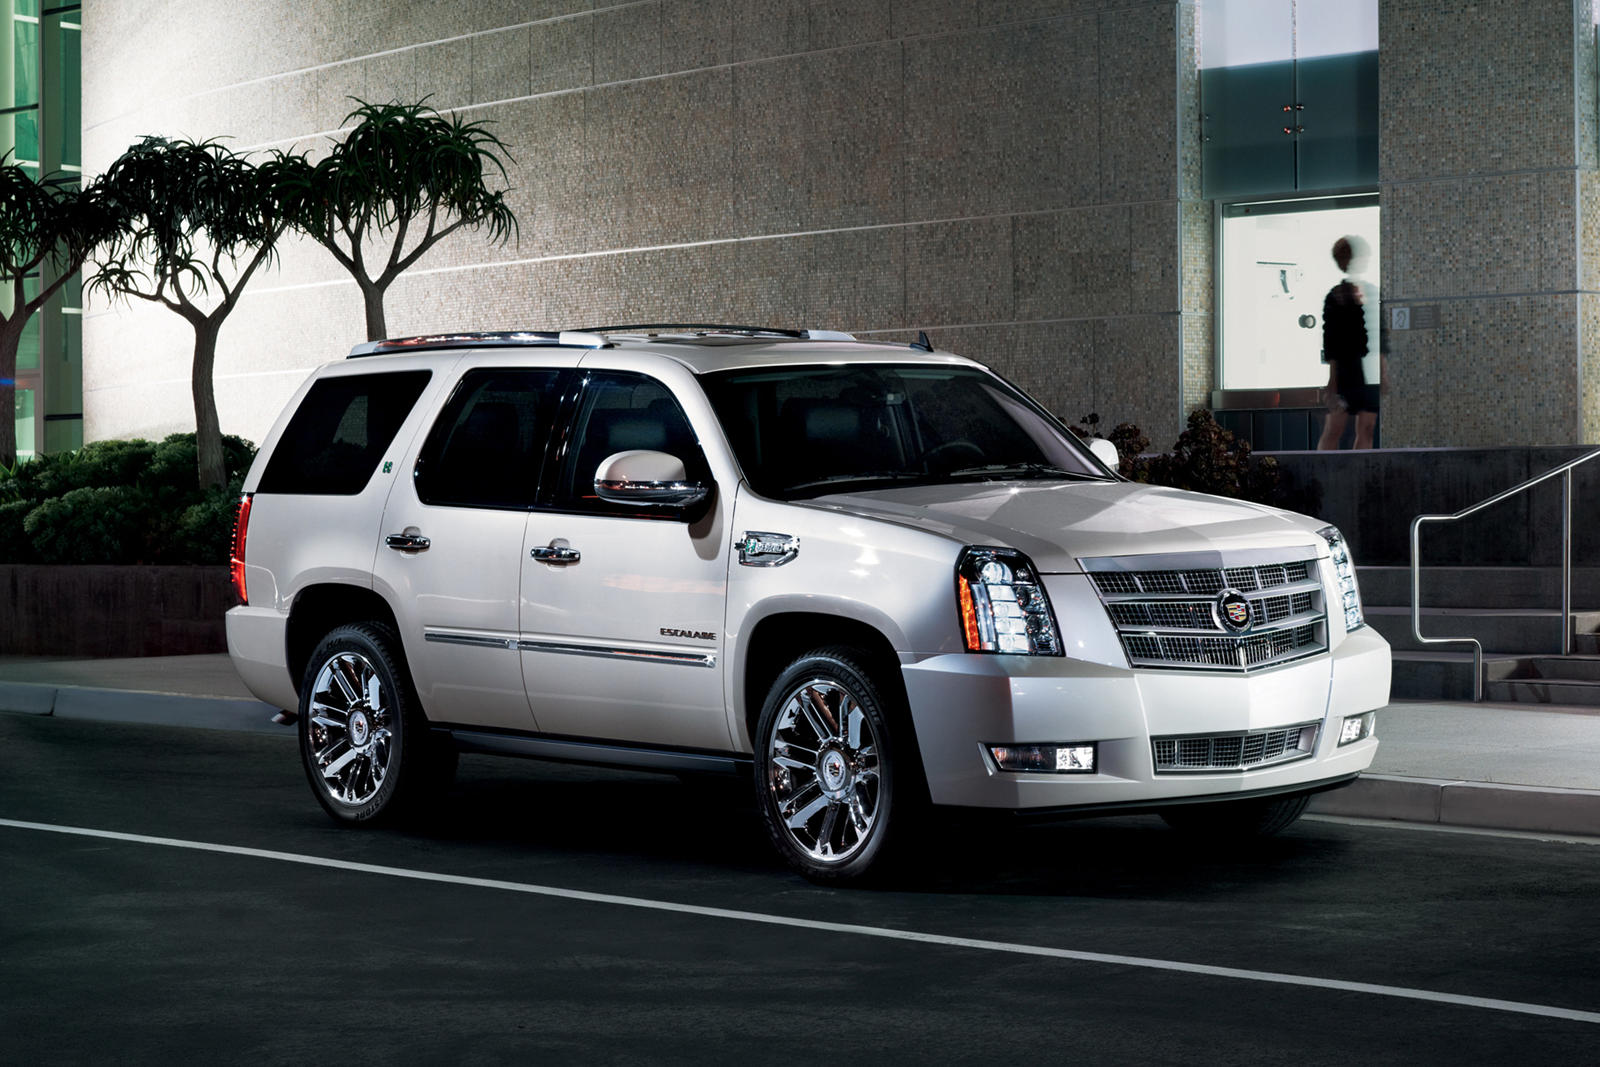 Used Cadillac Escalade Hybrid 4X4 for sale buy 4 Wheel Drive SUV with